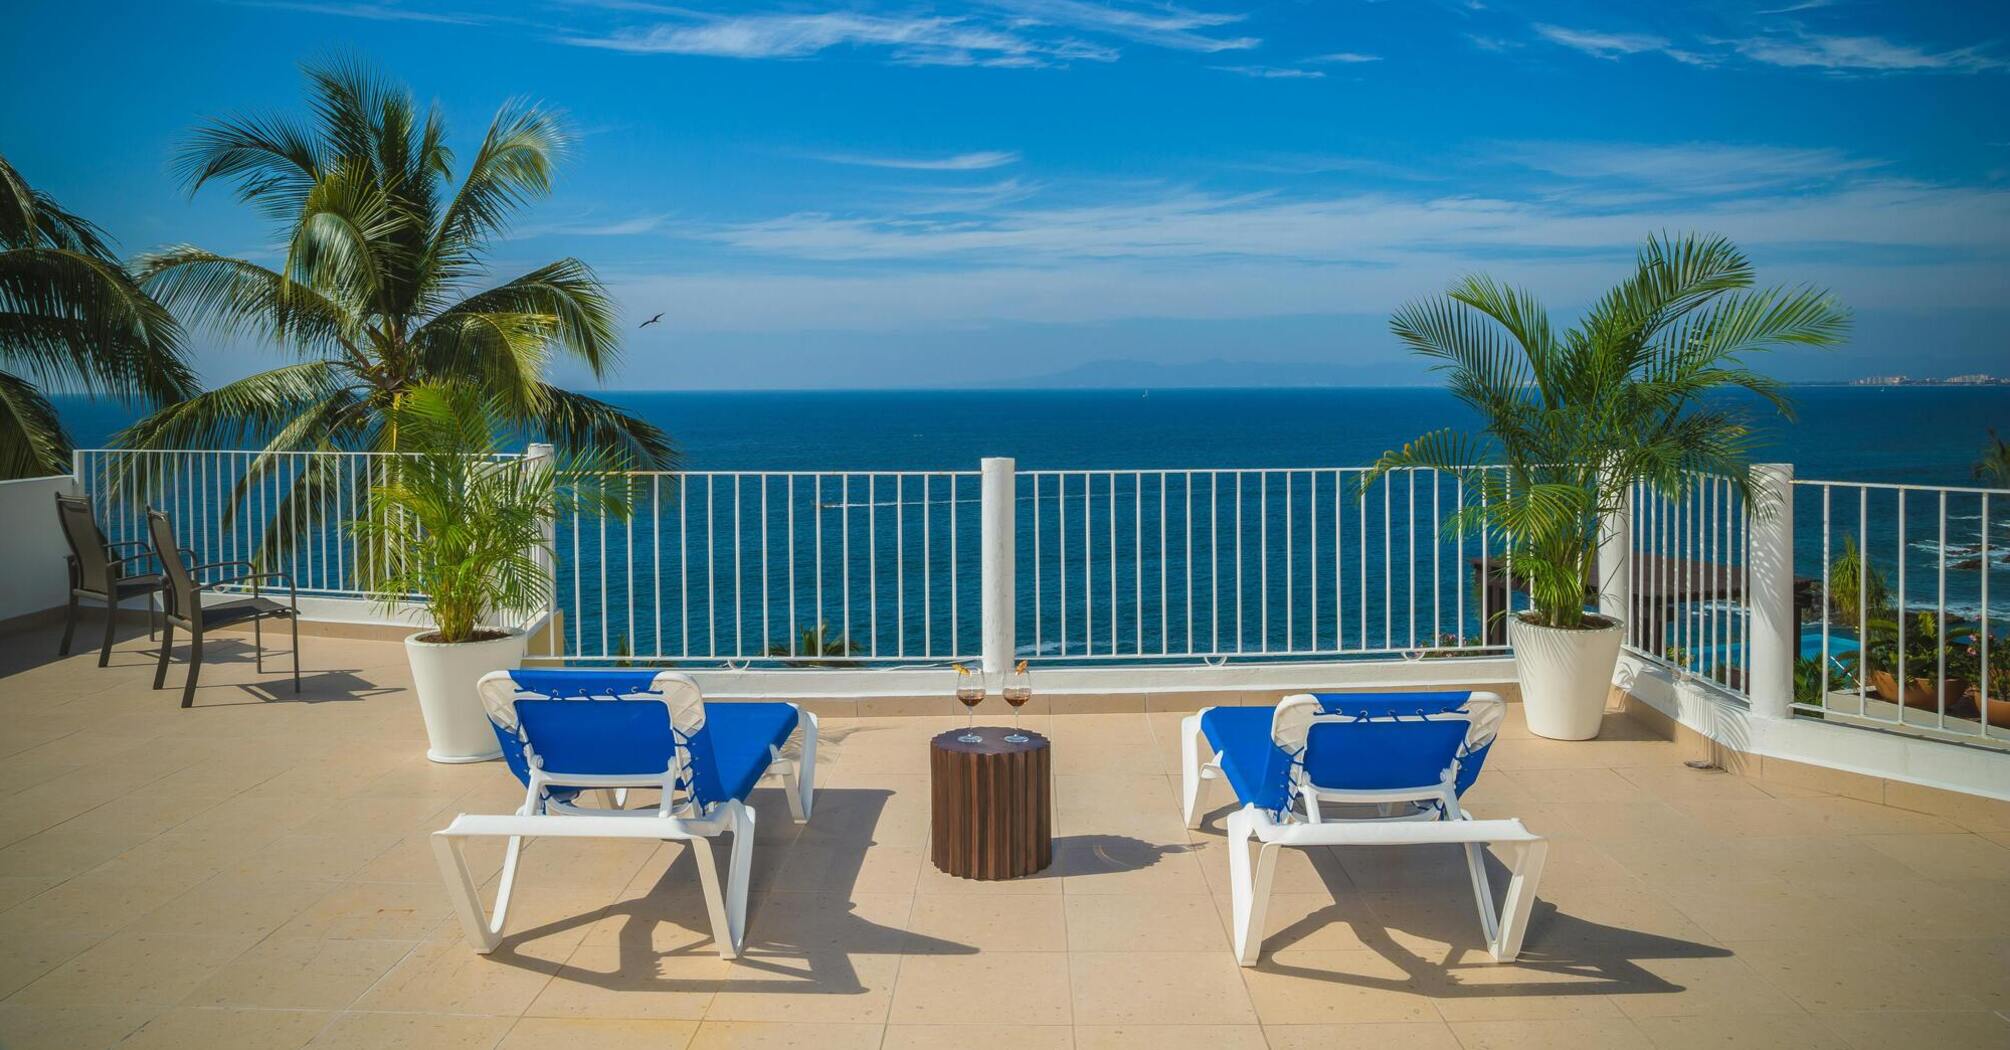 Top 7 Fort Lauderdale hotels: wonderful ideas for a vacation or weekend getaway near the ocean